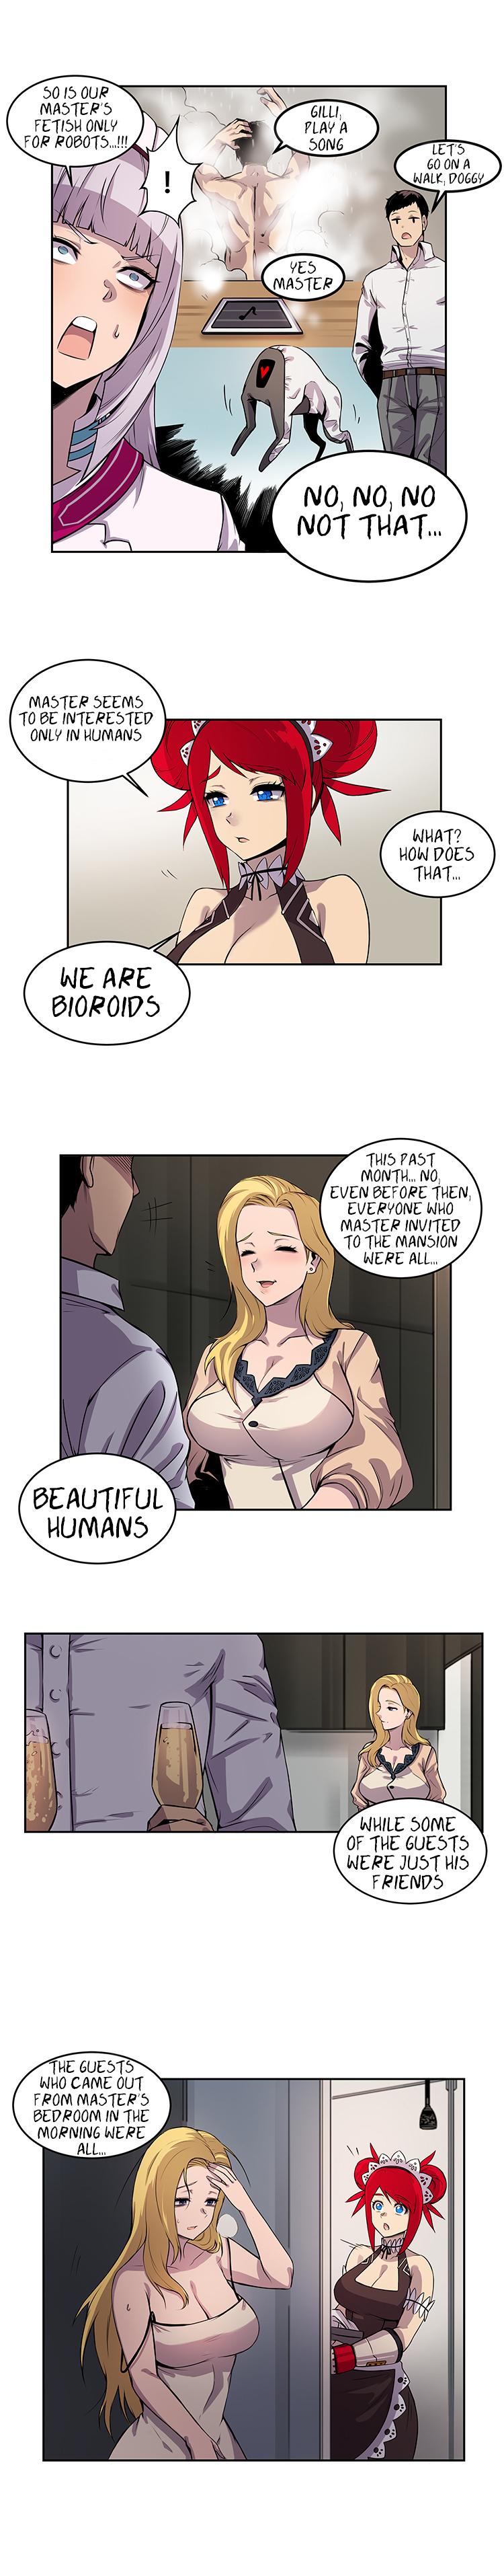 Rub Official Last Origin Chapters 1-5 ENG - Last origin Girl Girl - Page 51